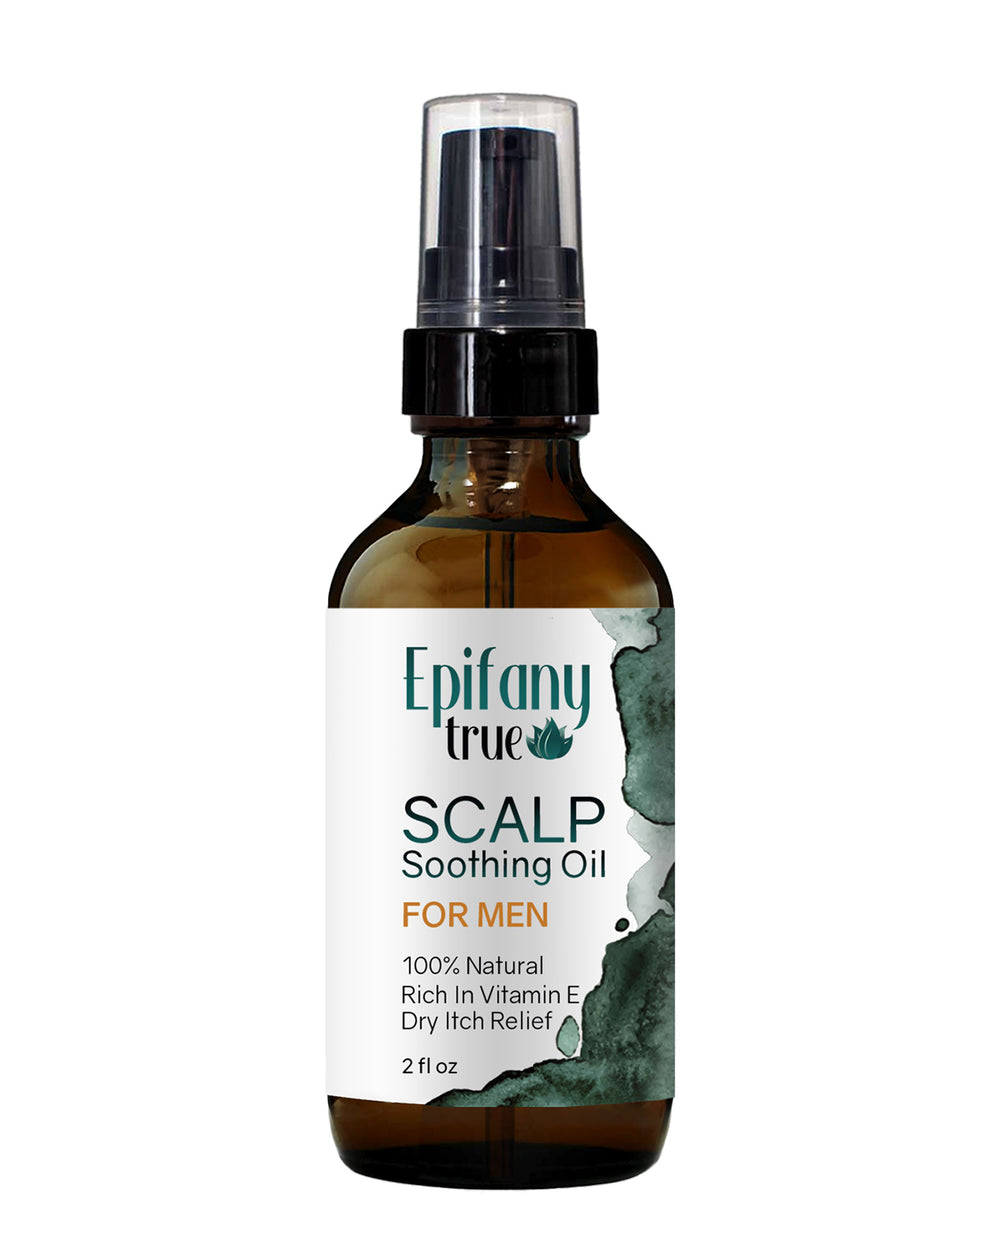 Epifany True 100% Natural Scalp Soothing Oil For Men 2oz for tender itchy scalp